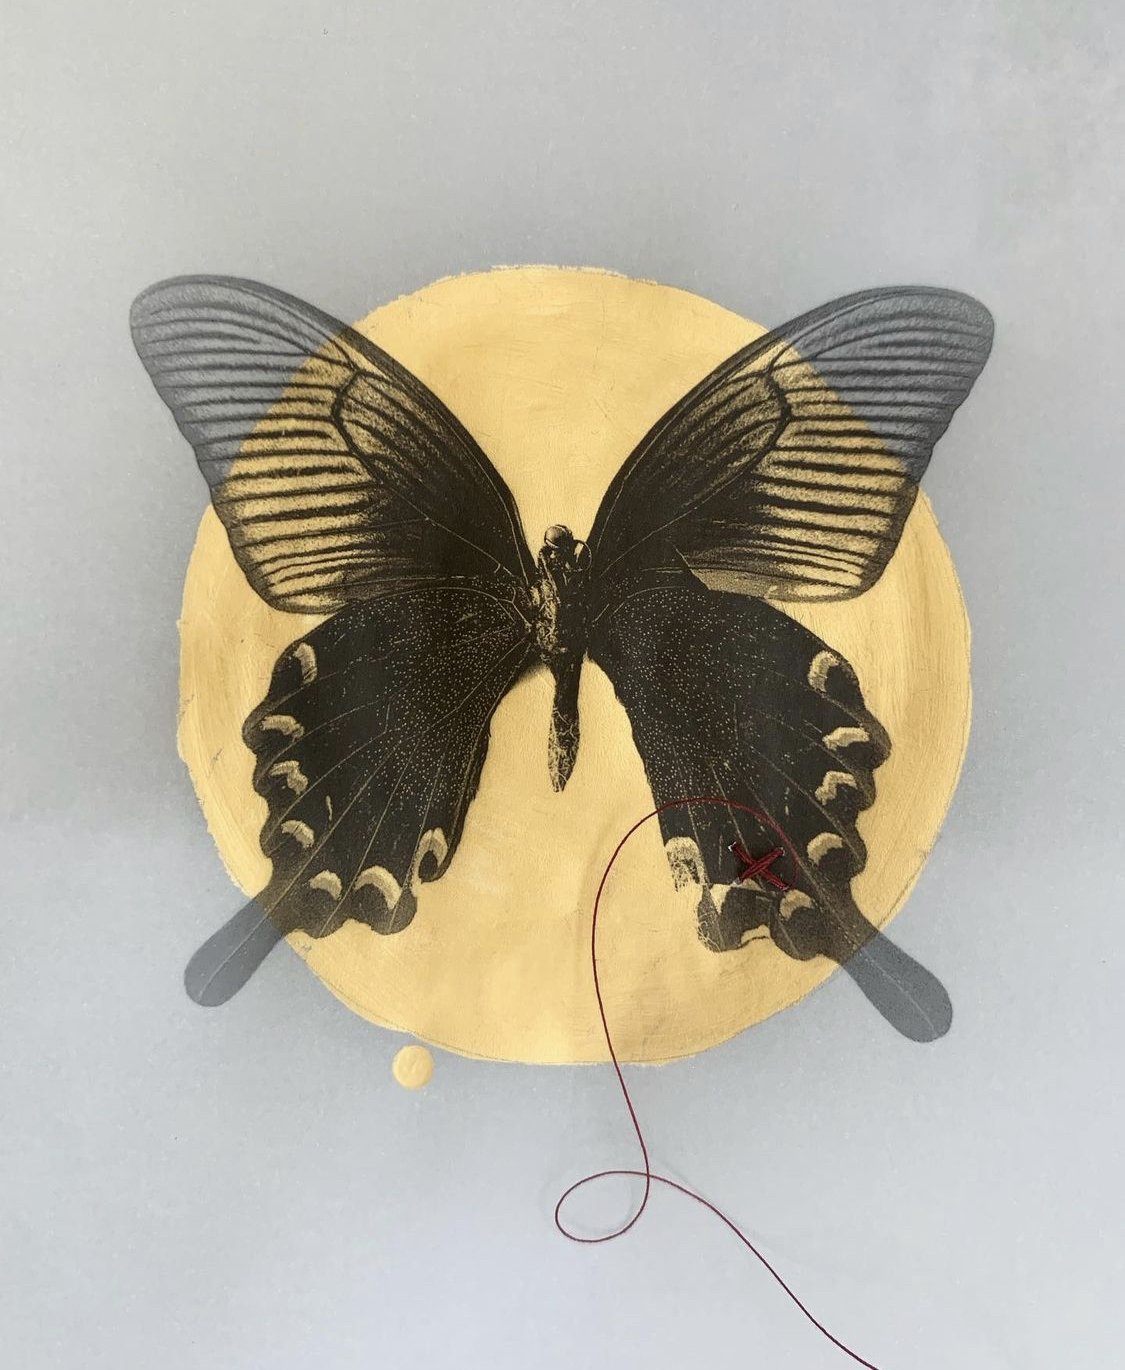 04_Butterfly with Mended Wing_Gold Leaf Gilding_Red Stitch_on Vellum.jpg